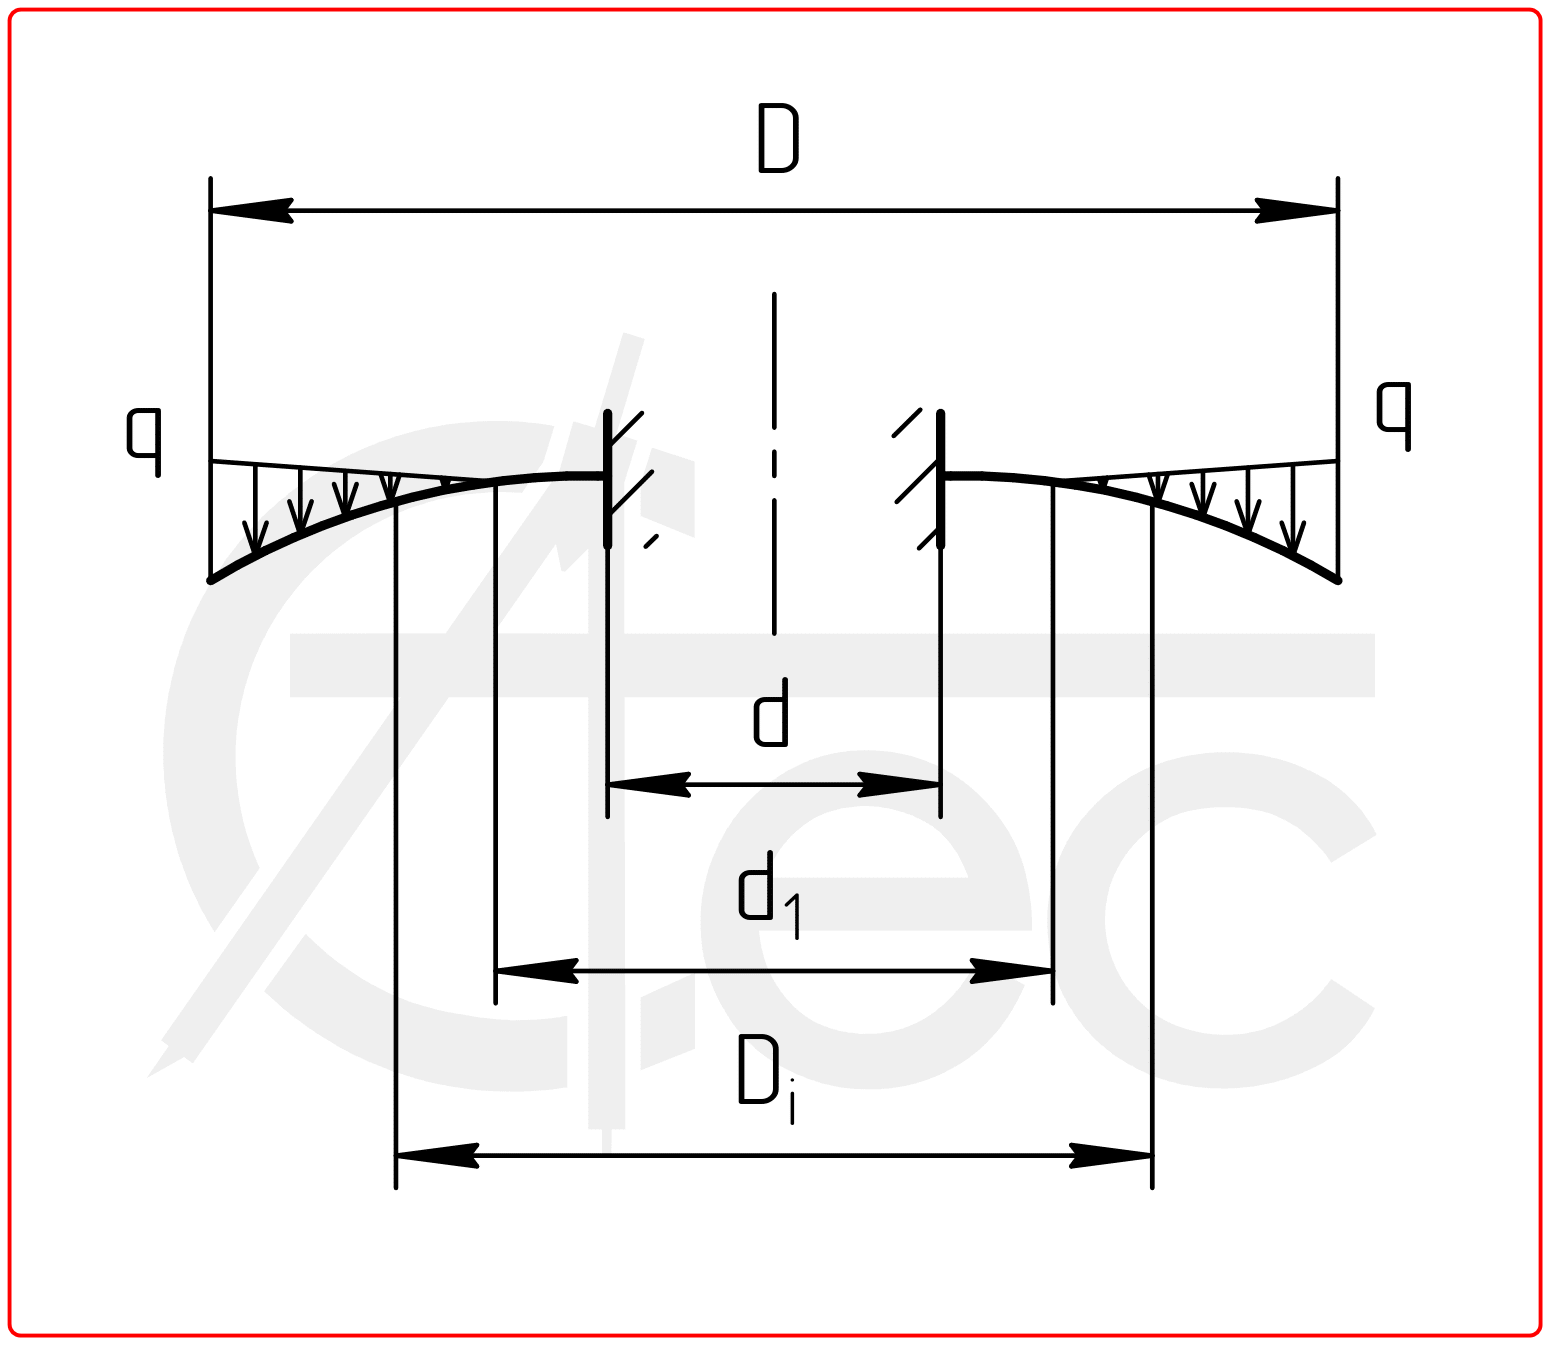 calculation of Circle plate with inner edge fixed under distributed load